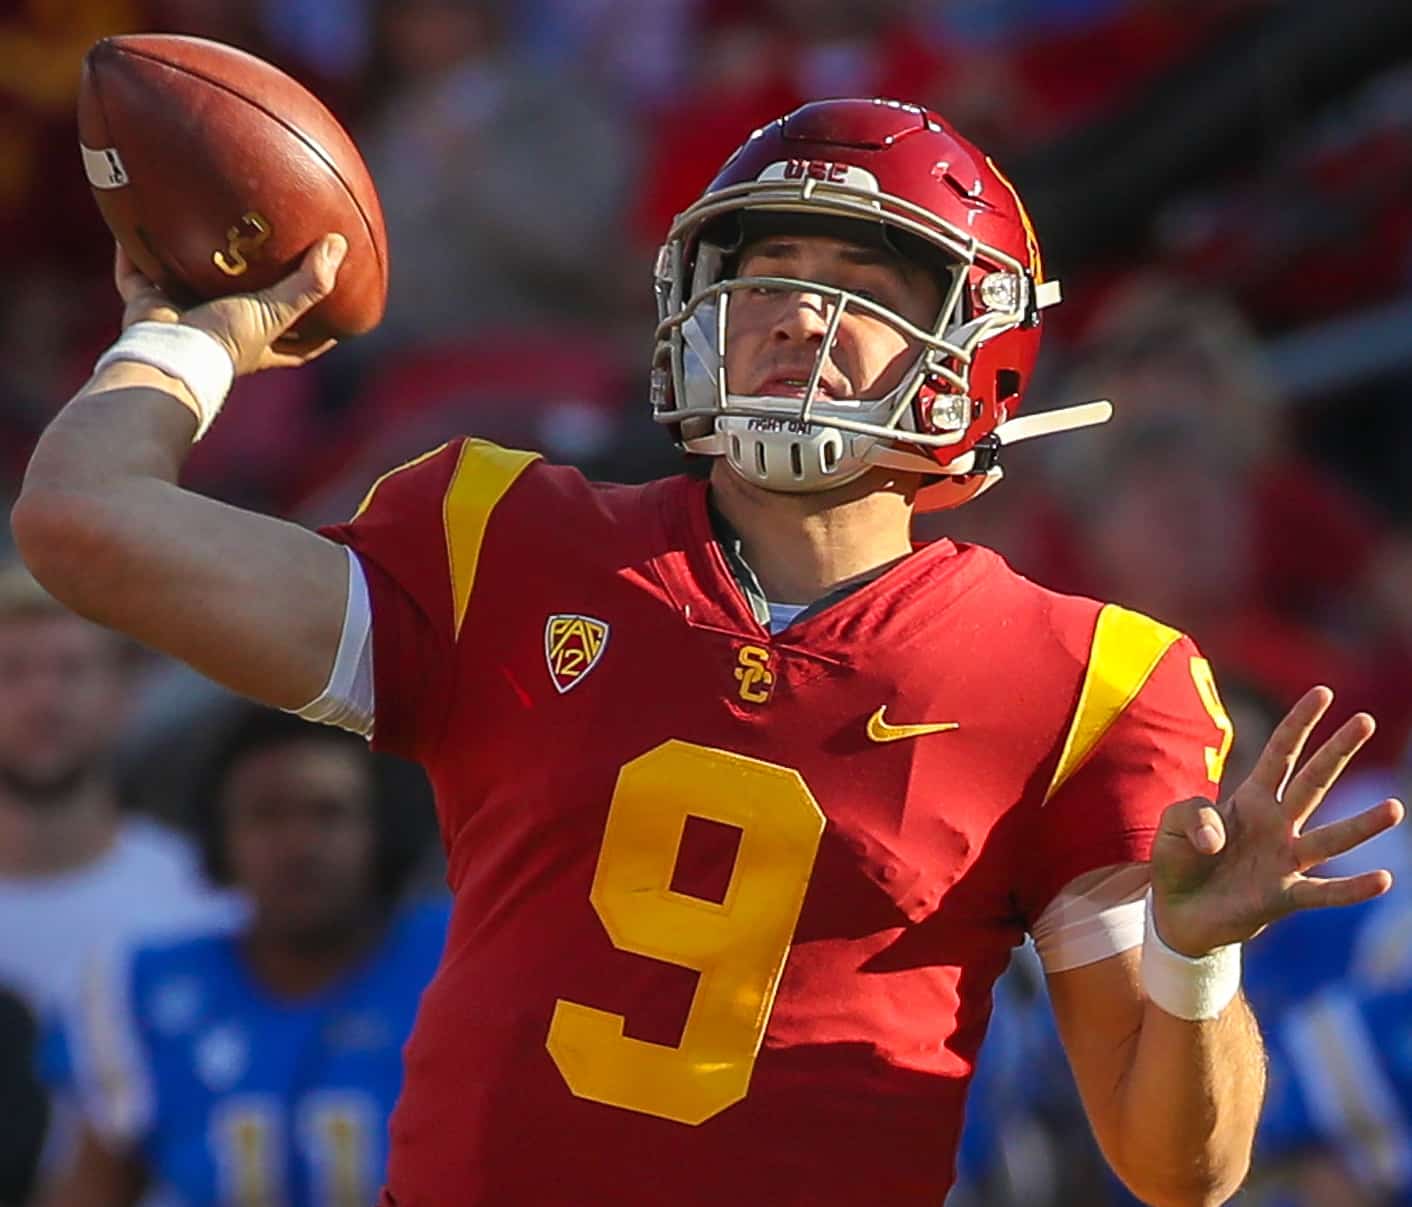 USC Trojans quarterback Kedon Slovis (9) passes to USC Trojans wide receiver Drake London (15) for a 32-yard touchdown pass in the third quarter; UCLA at USC. November 23, 2019, Los Angeles, CA